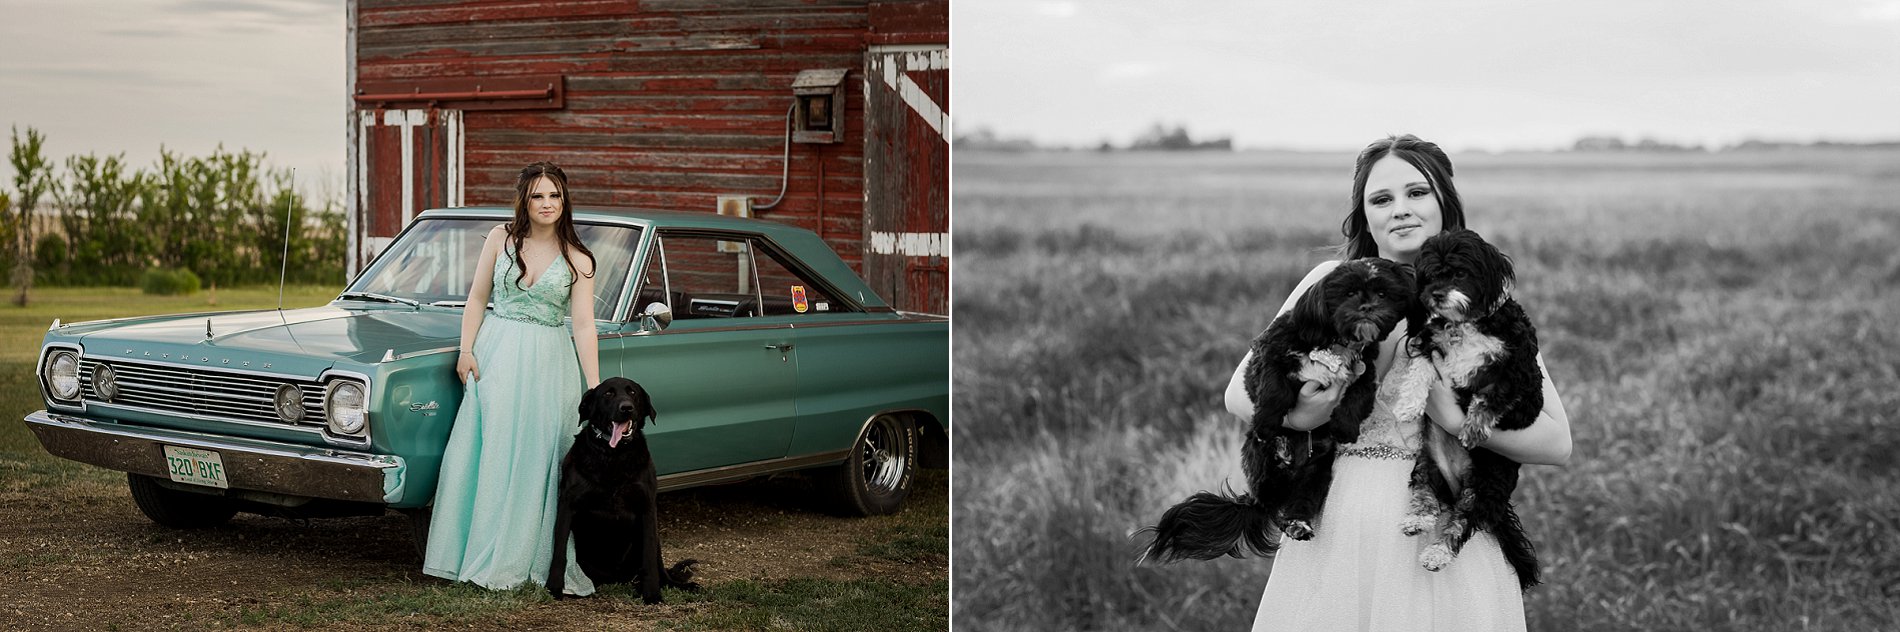 High school girl in a teal grad dress poses with her dogs for her rural Saskatoon graduation photos.